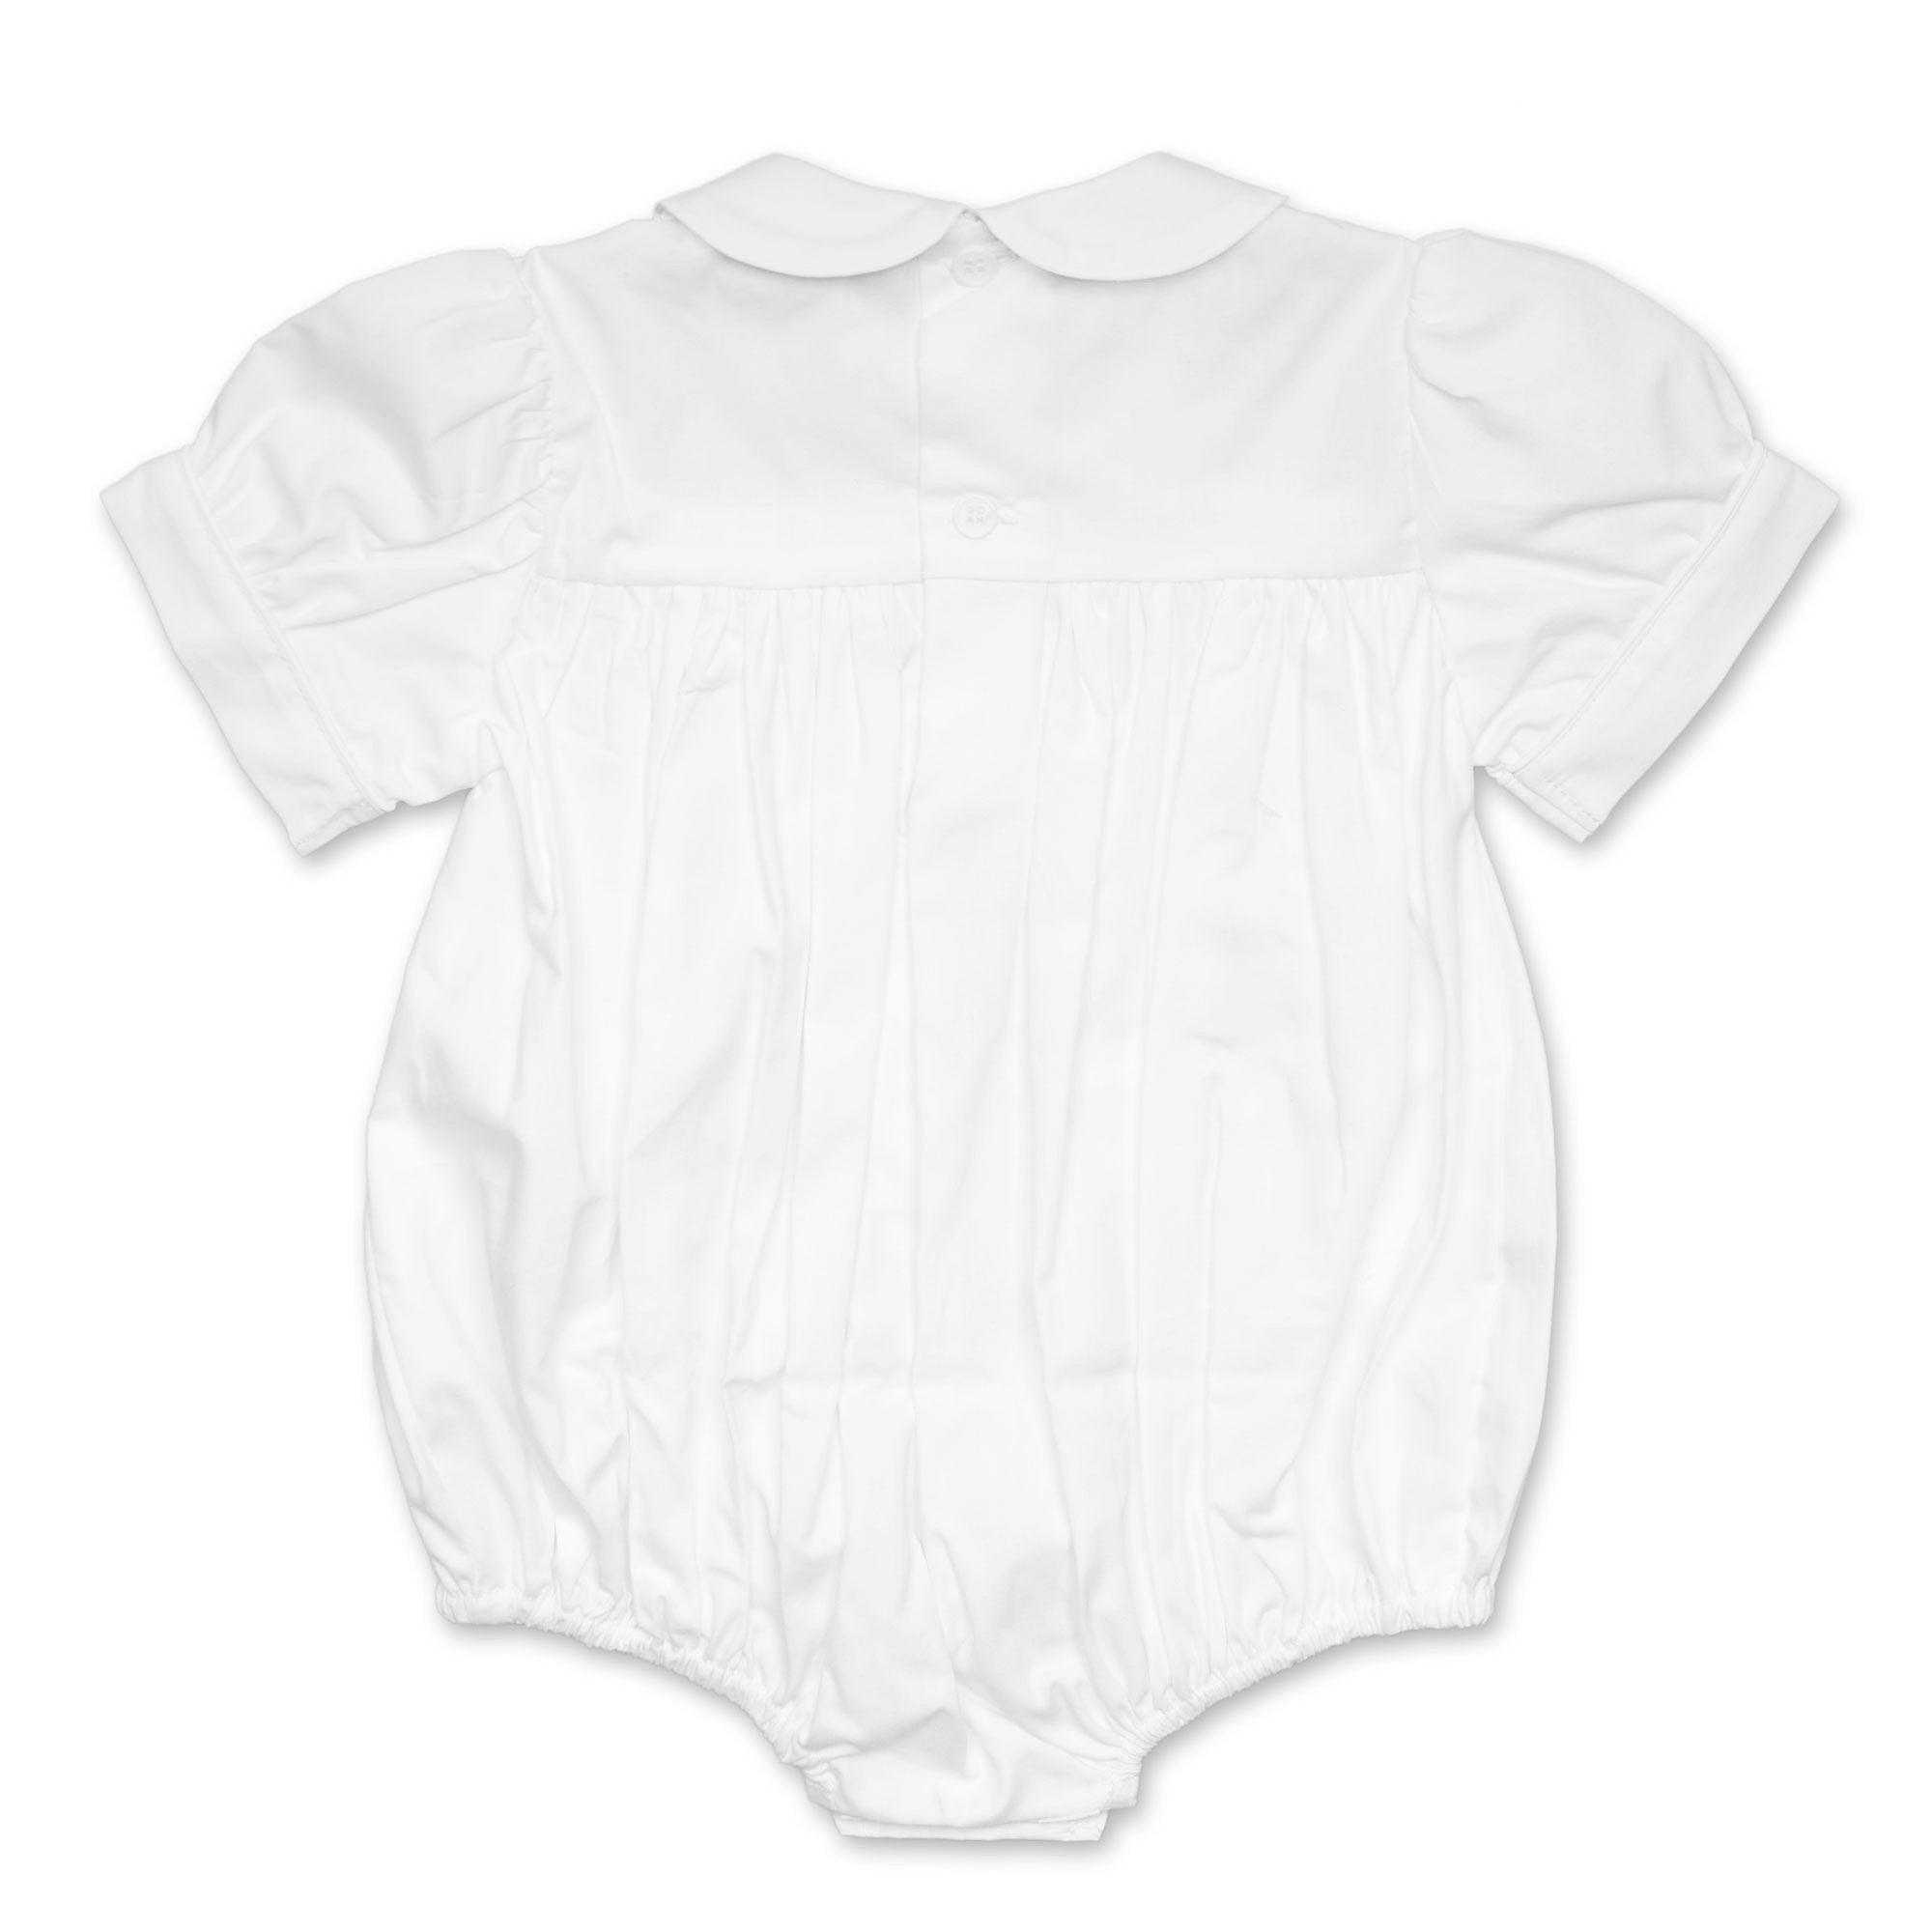 Tilly White Smocked Romper - Cou Cou Baby